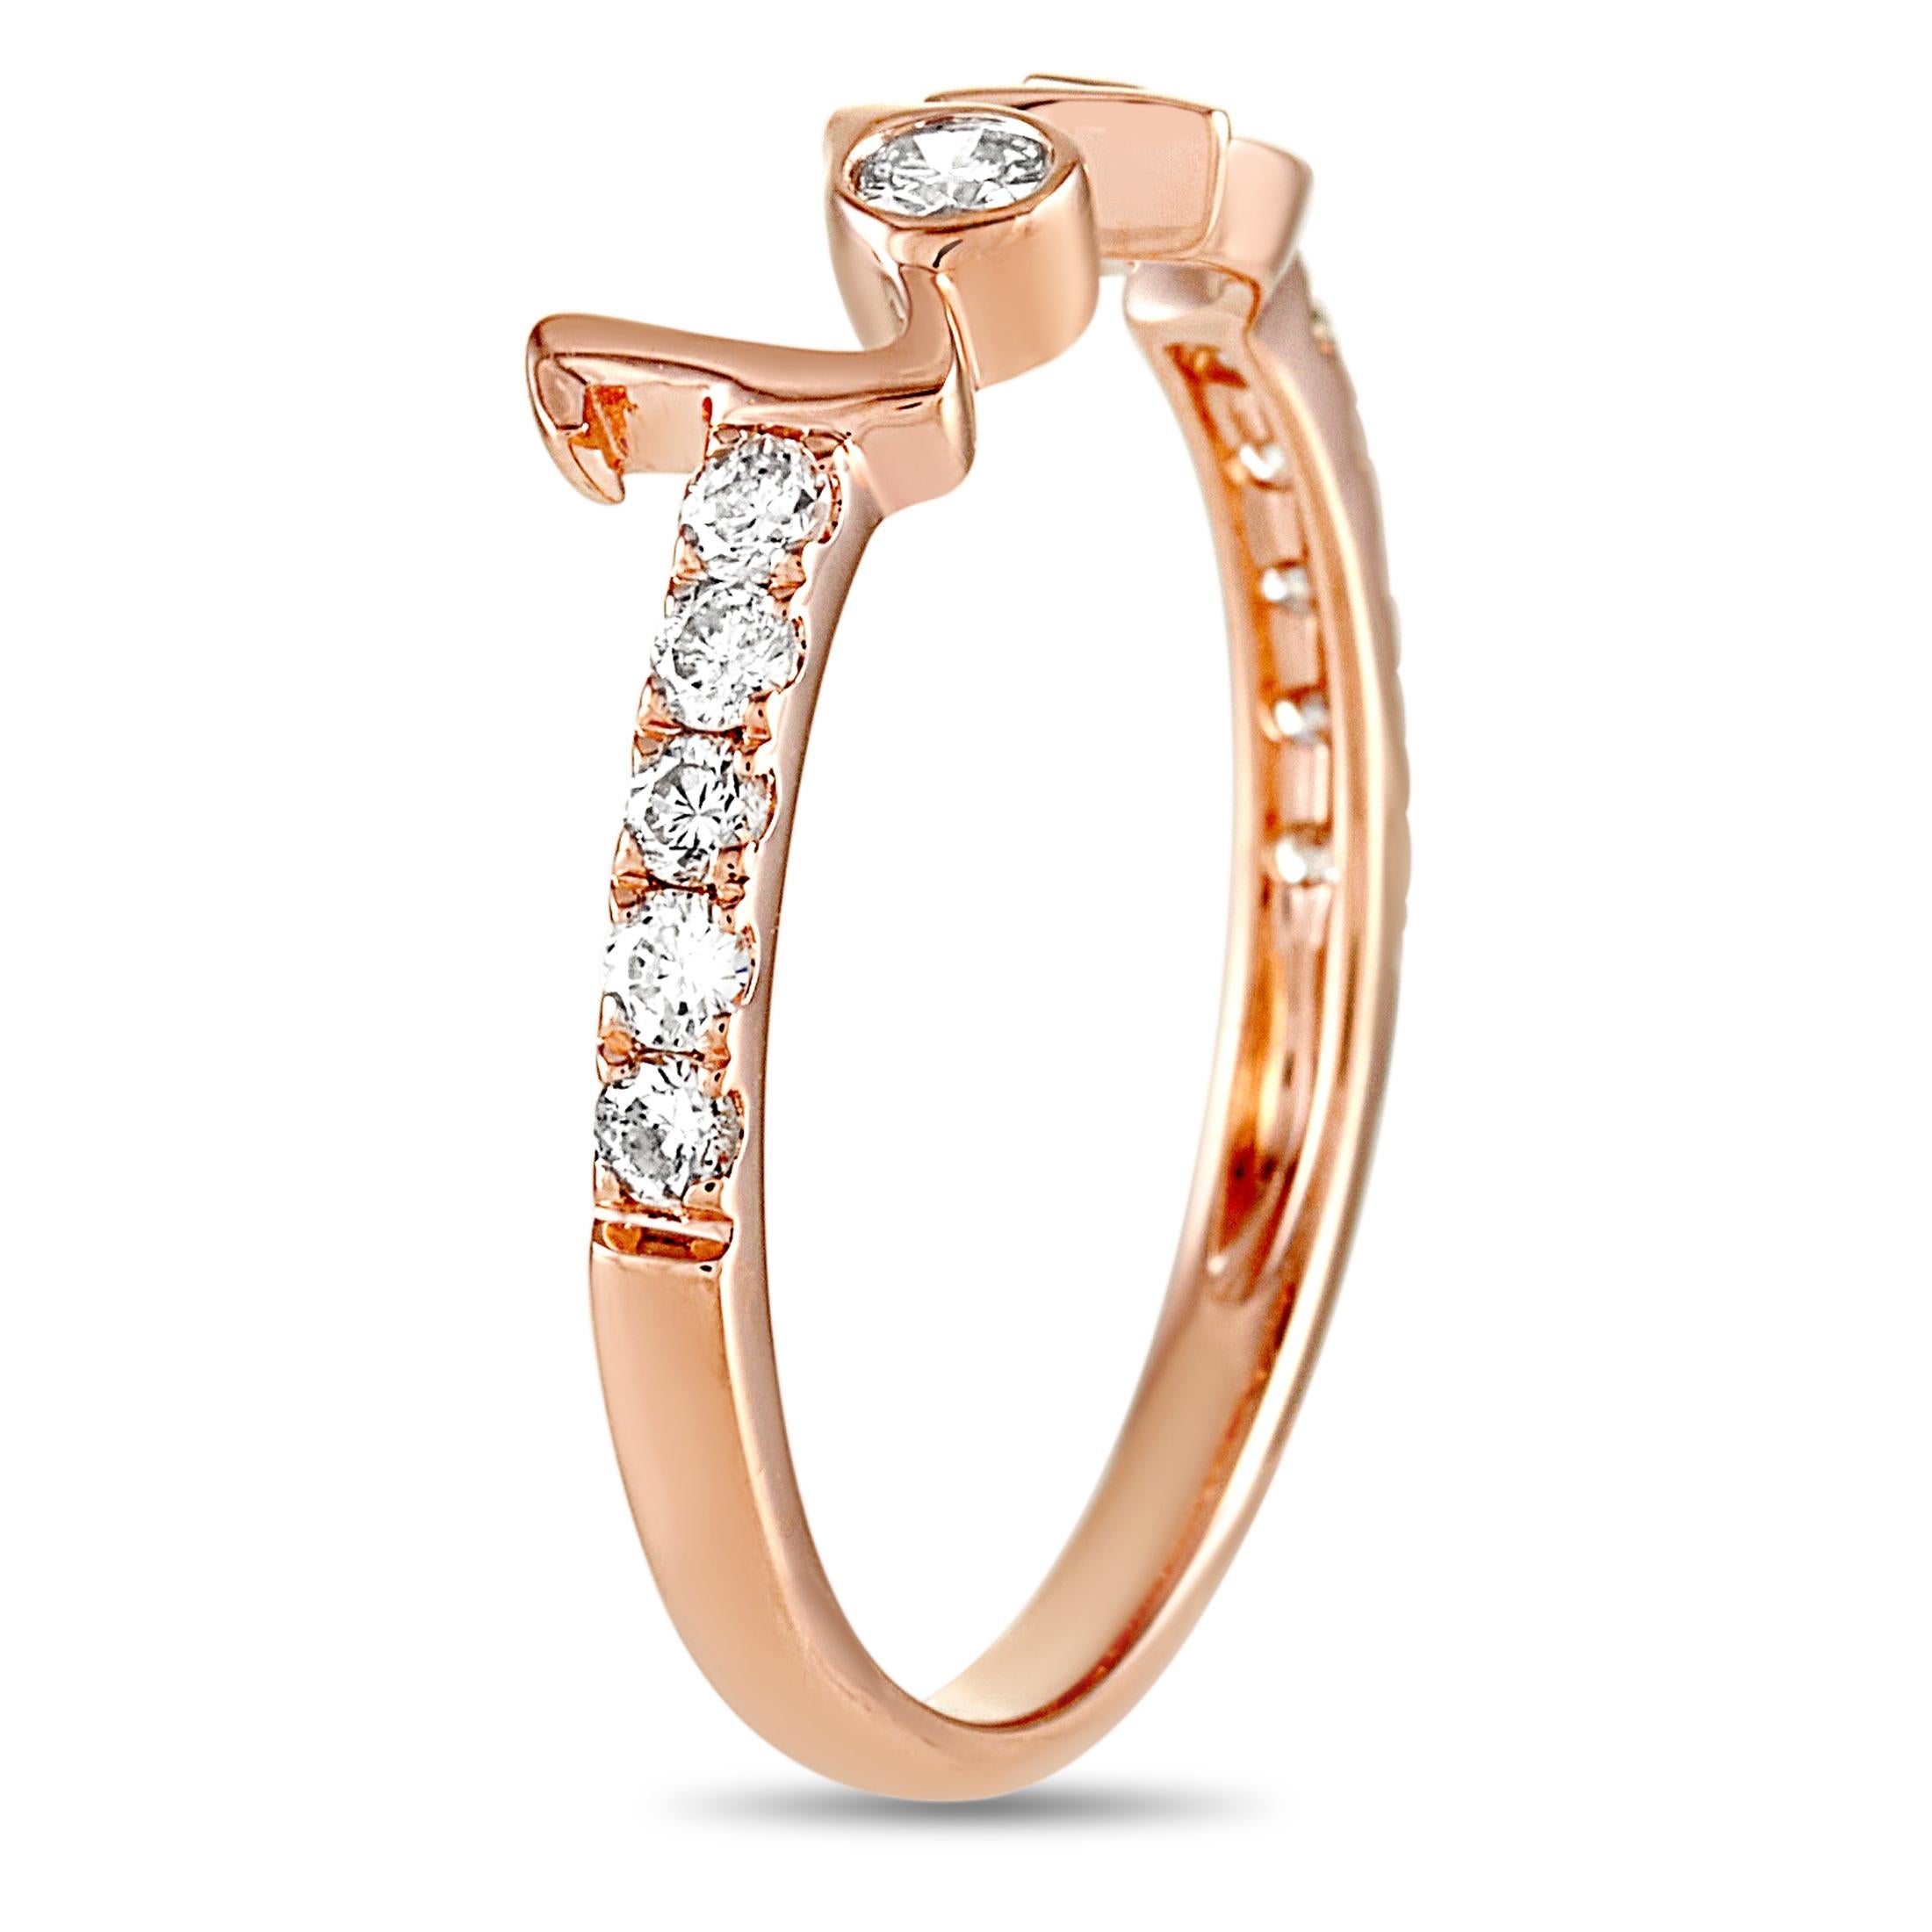 This LB Exclusive love ring is crafted from 14K rose gold and weighs 1.6 grams. It boasts band thickness of 2 mm, while top dimensions measure 5 by 20 mm. The ring is set with diamonds that total 0.25 carats.
 
 Offered in brand new condition,